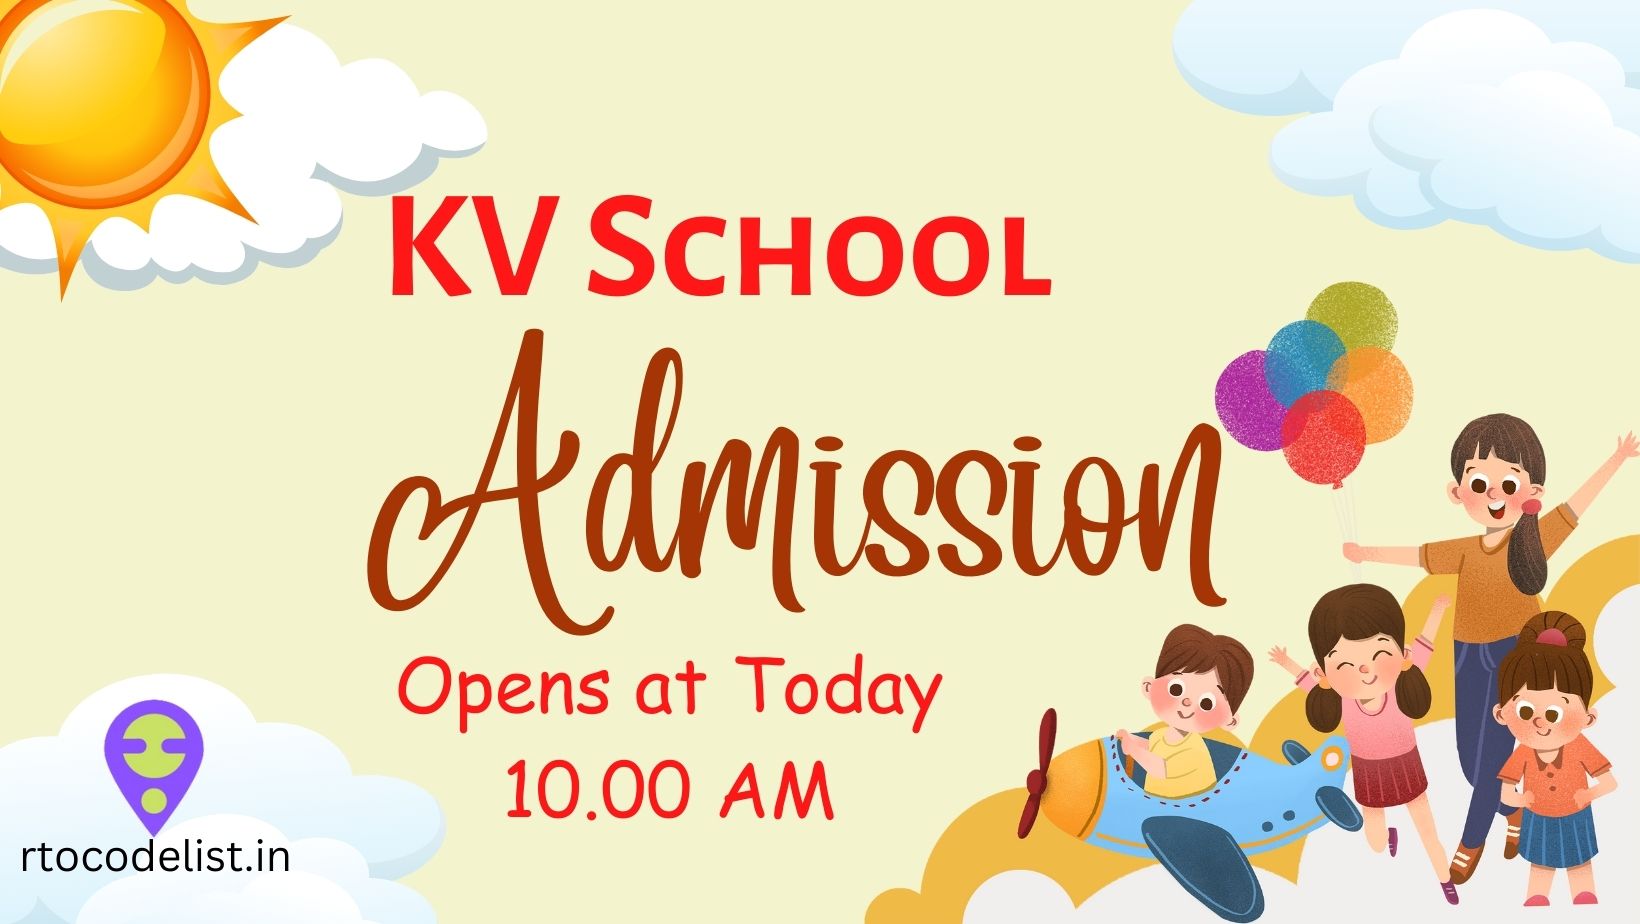 KV School Class 1 Online Admission Open Today at 10 AM